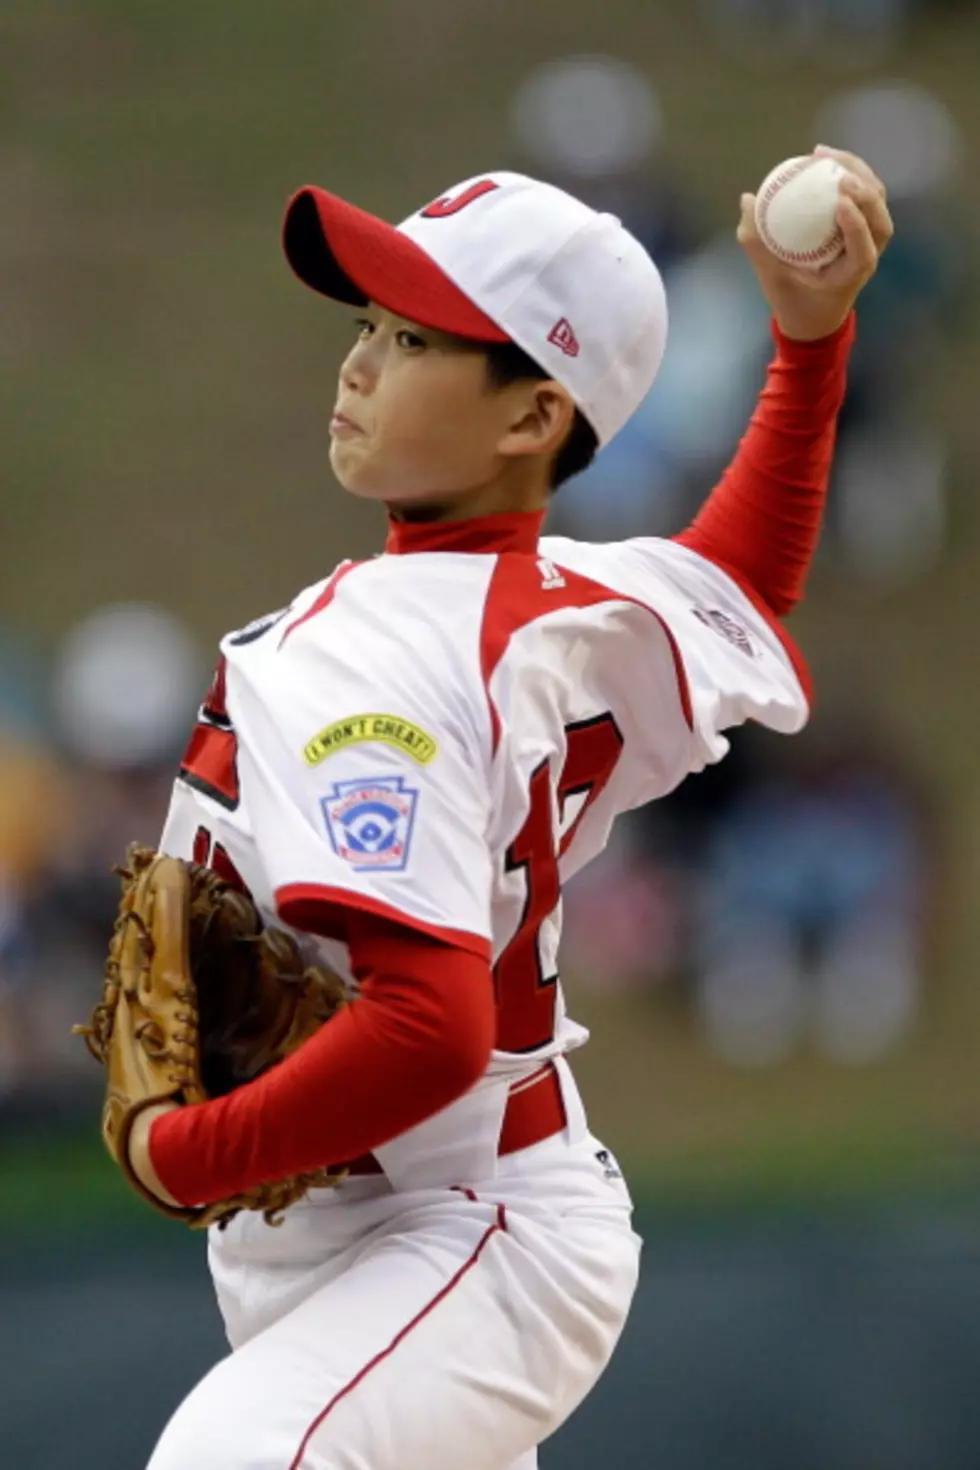 Yakima National Little League Tryouts Are This Saturday (Photo)